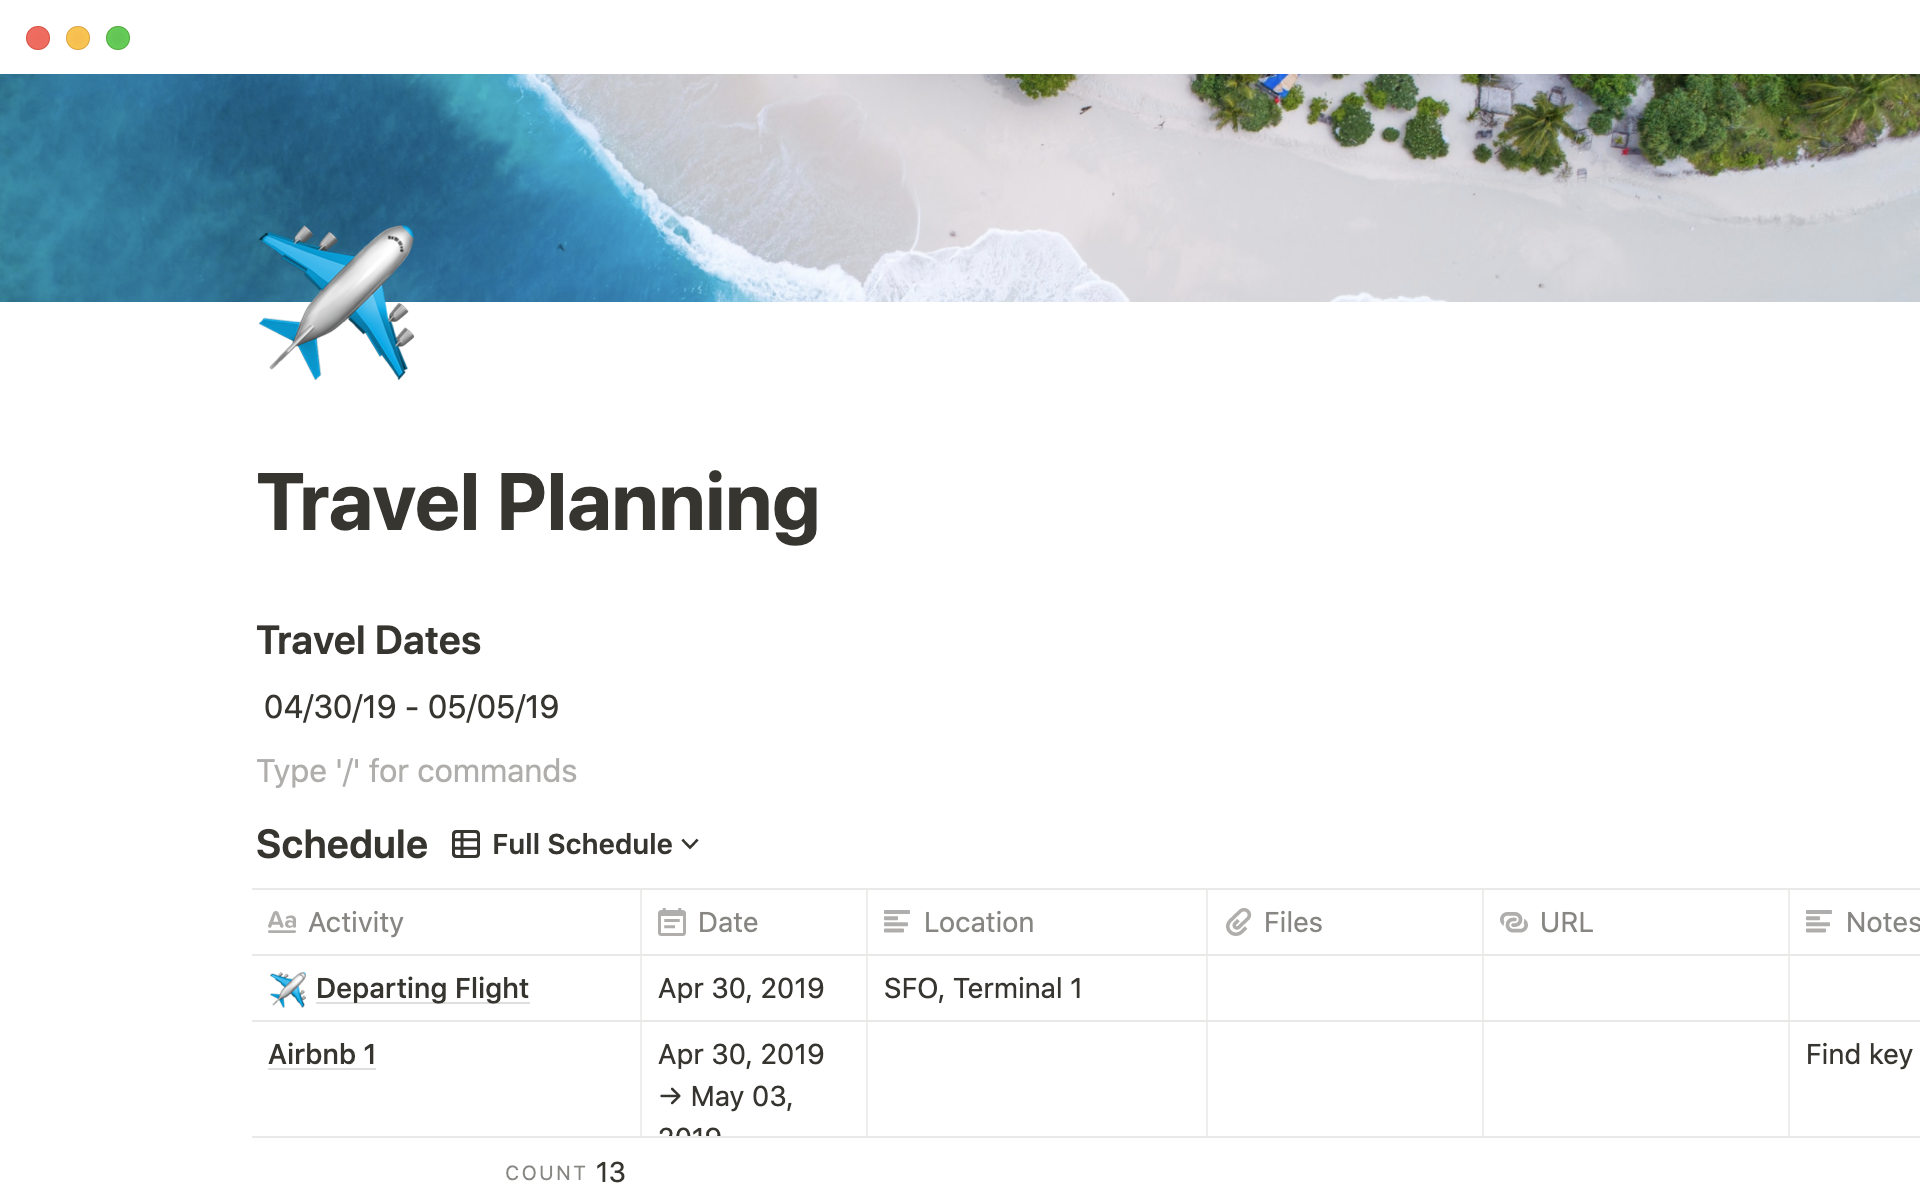 The desktop image for the Travel planning template